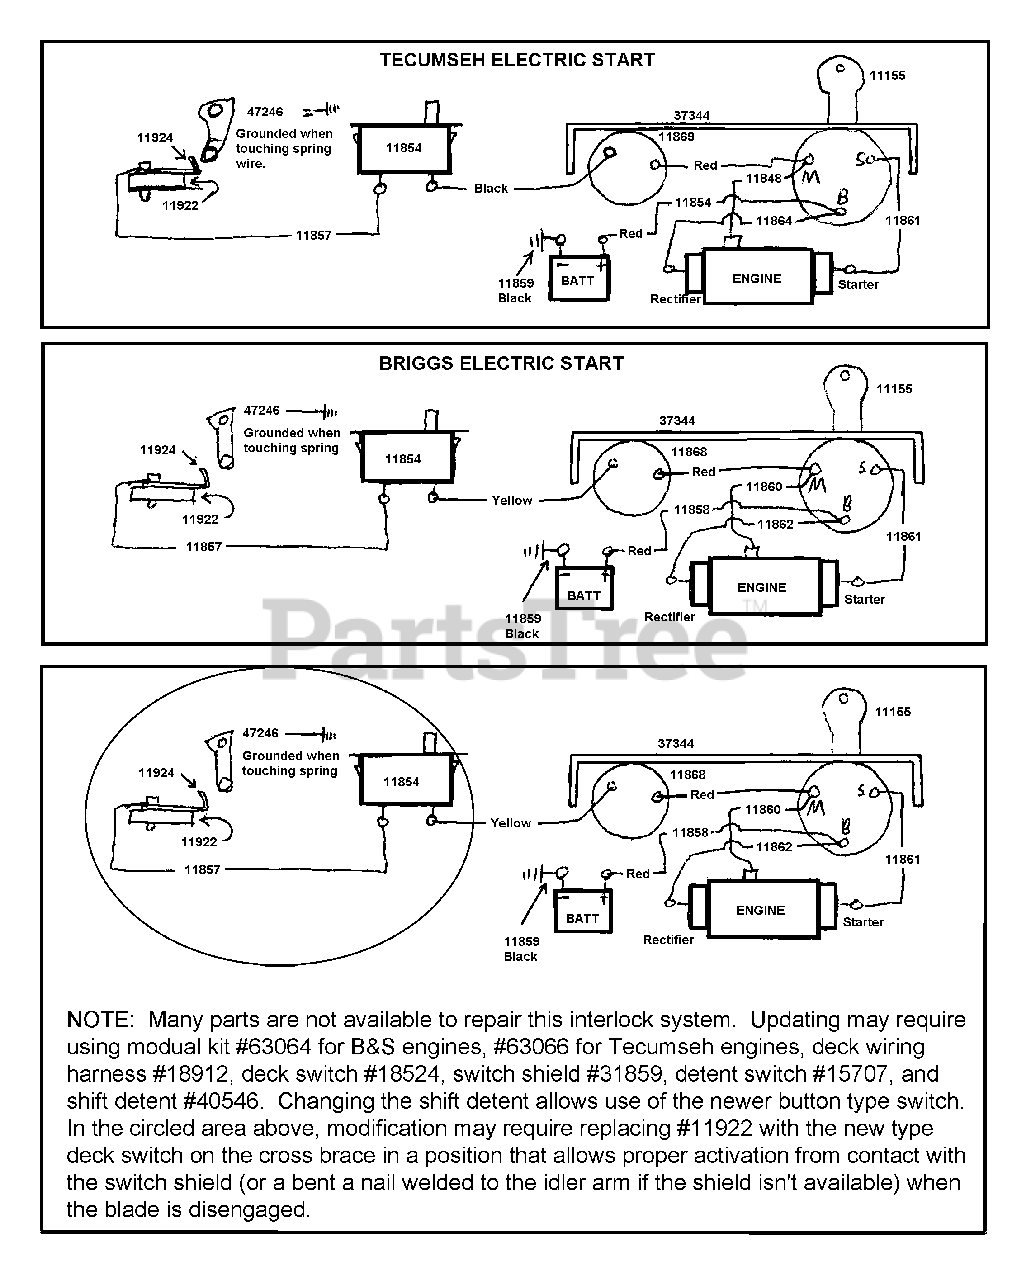 Wiring Diagram For Snapper Riding Mower from www.partstree.com